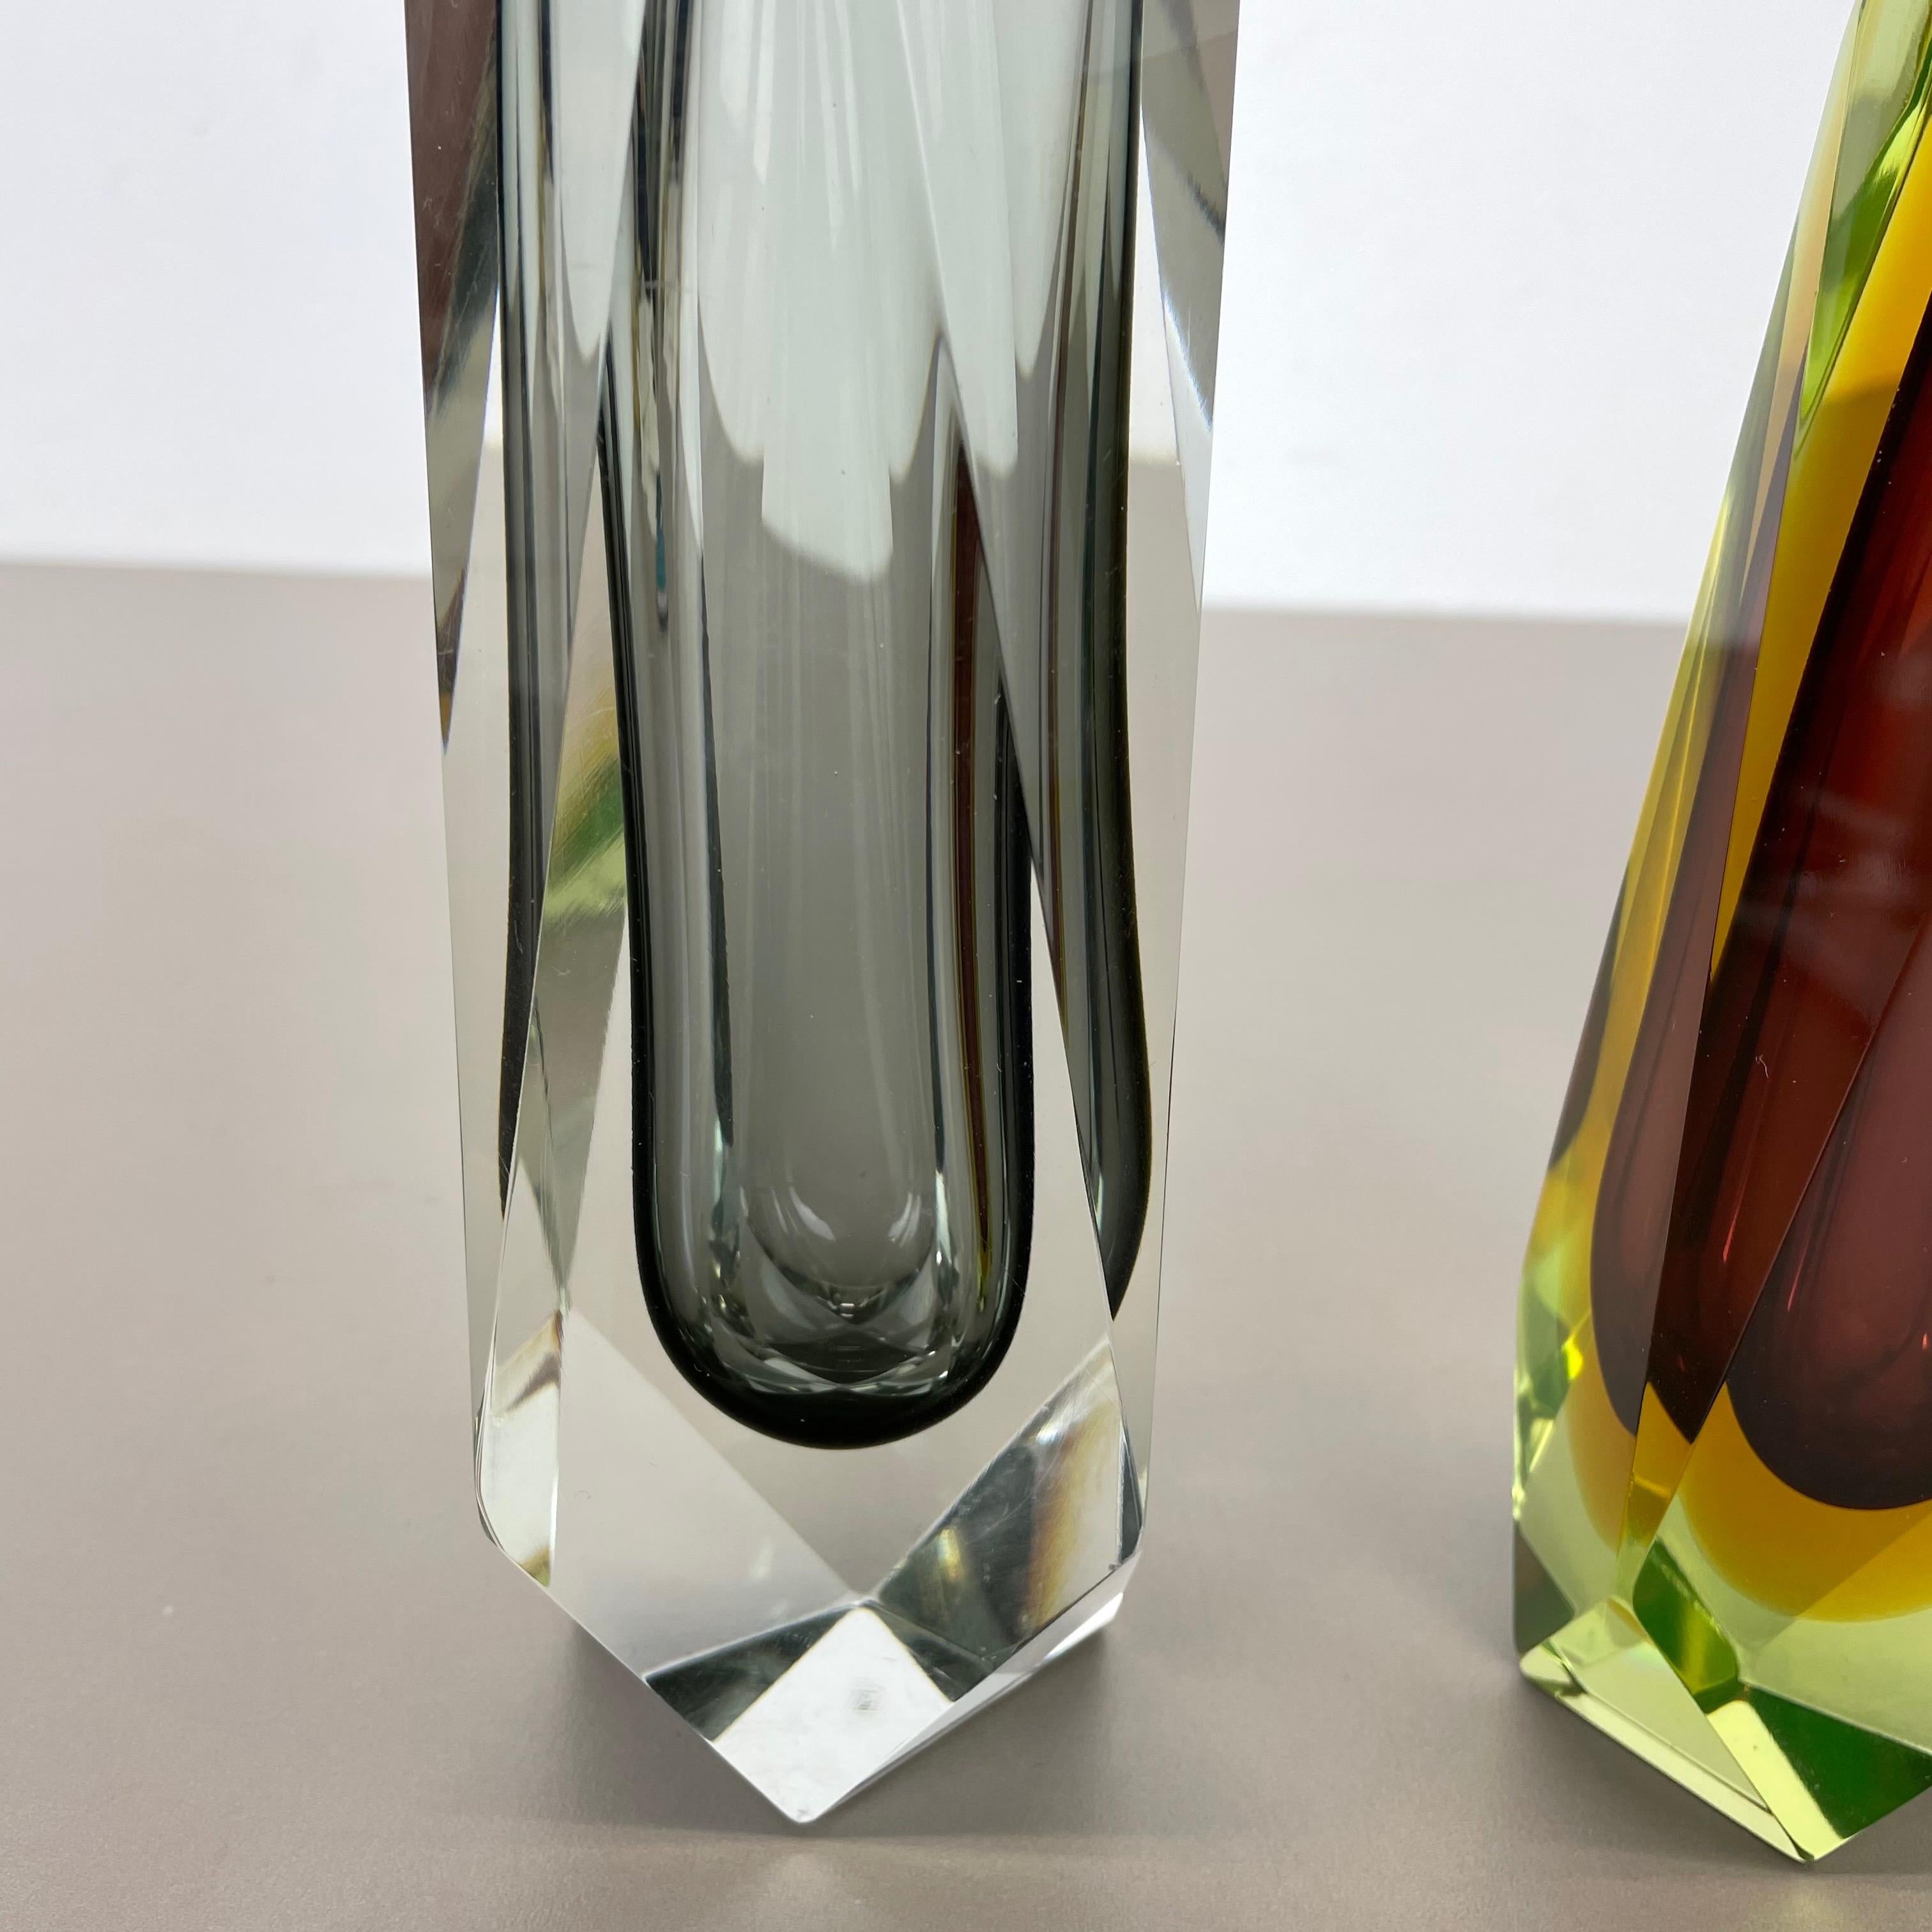 Rare Set of 2 Faceted Murano Glass Sommerso Vases, Italy, 1970s For Sale 1